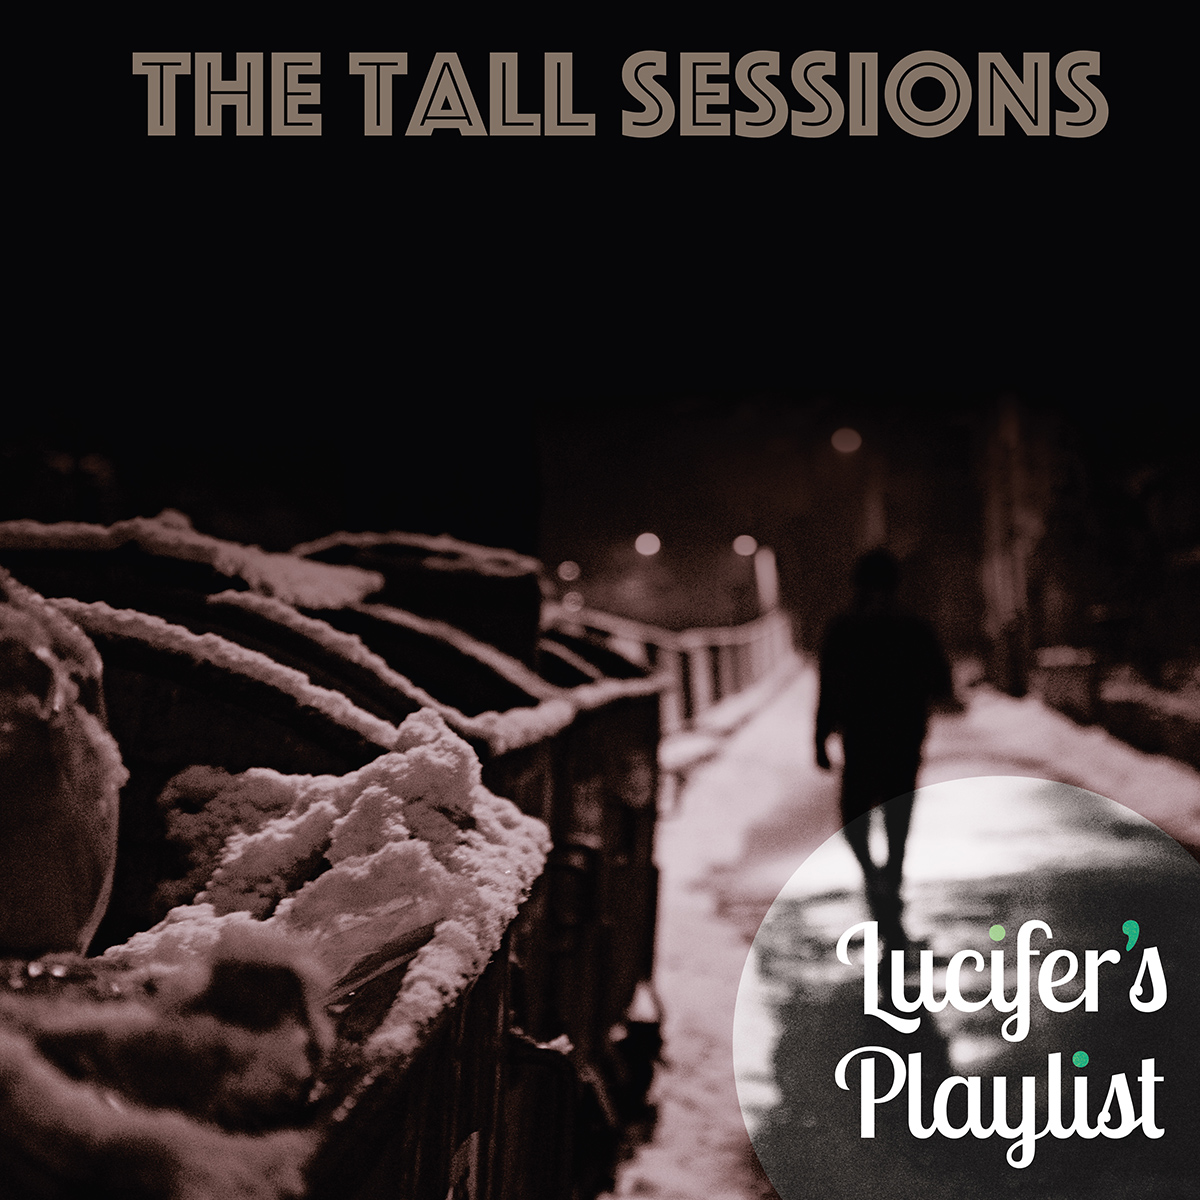 The Tall Sessions